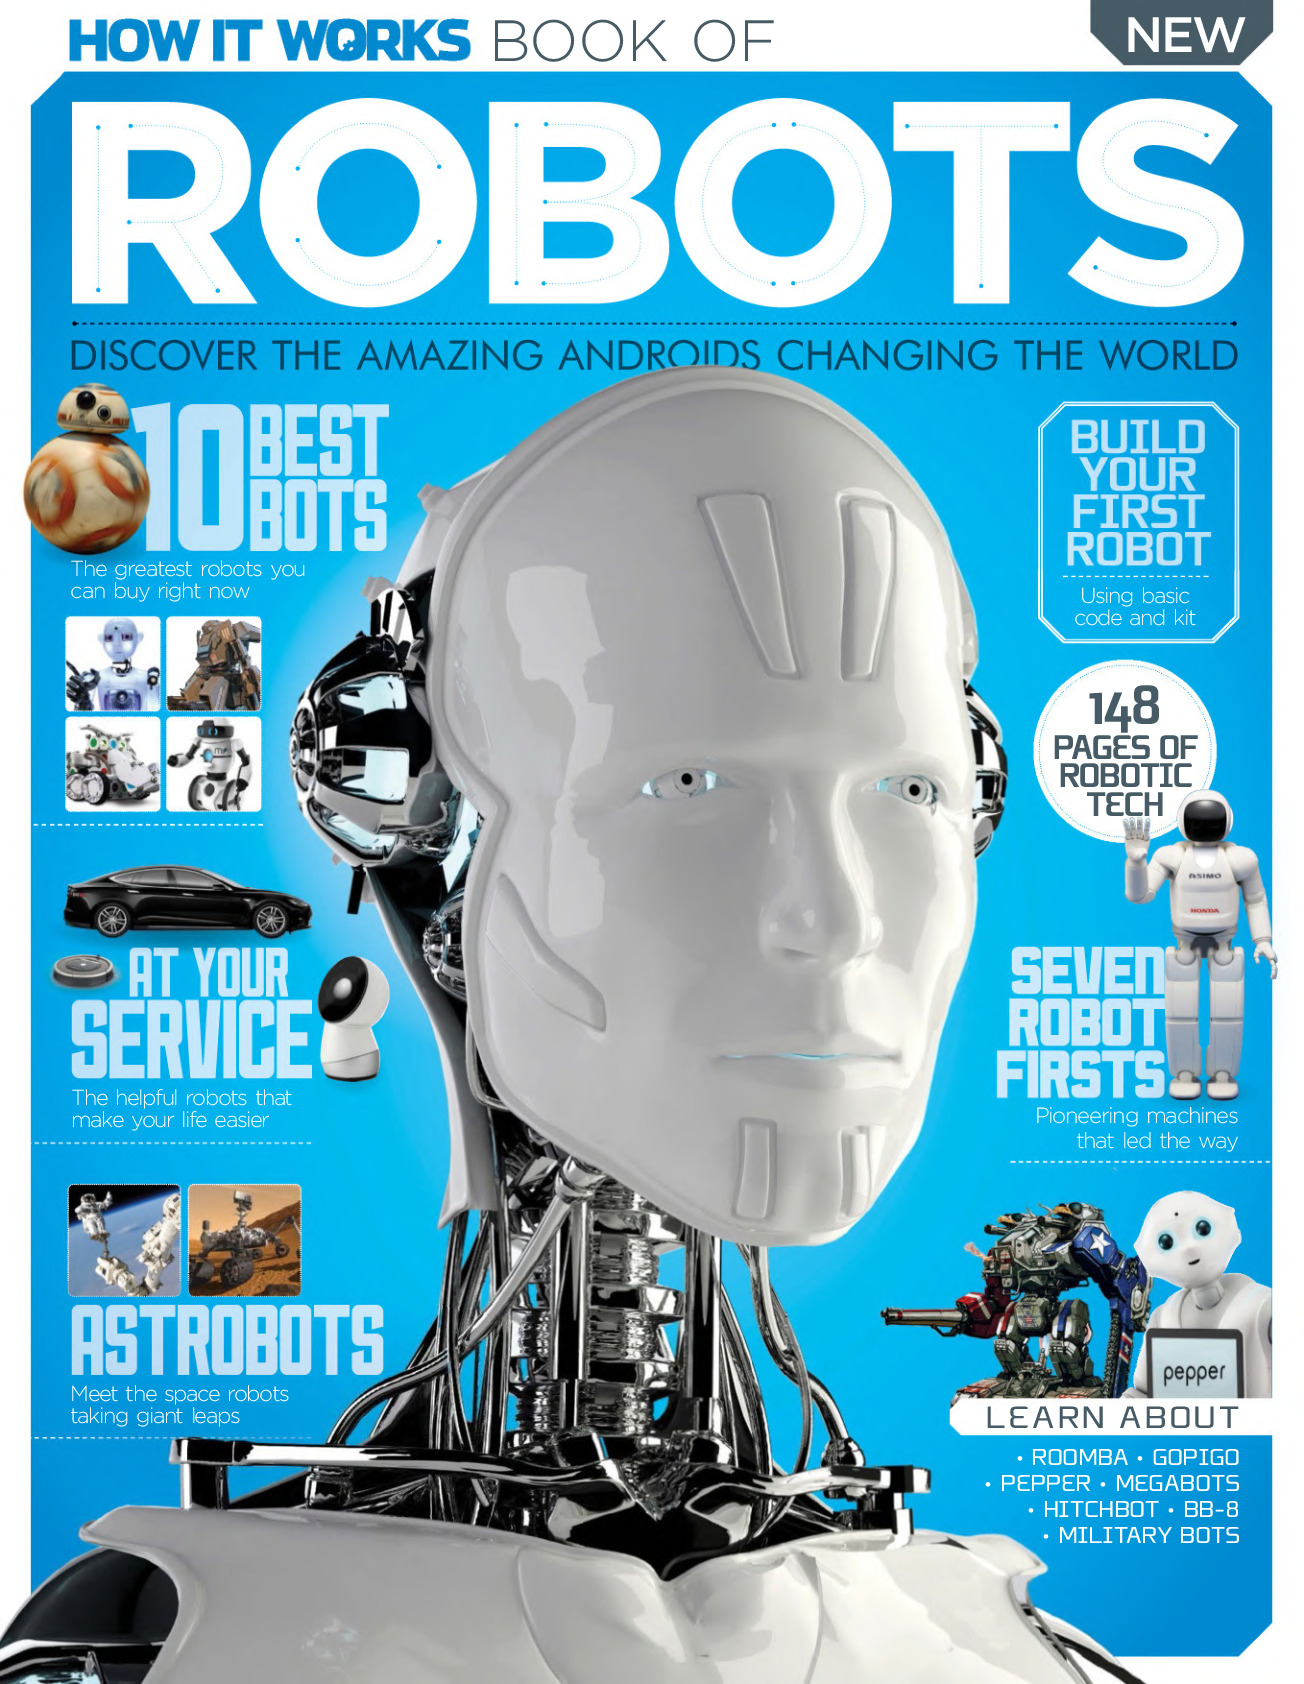 How It Works Book of Robots 2015